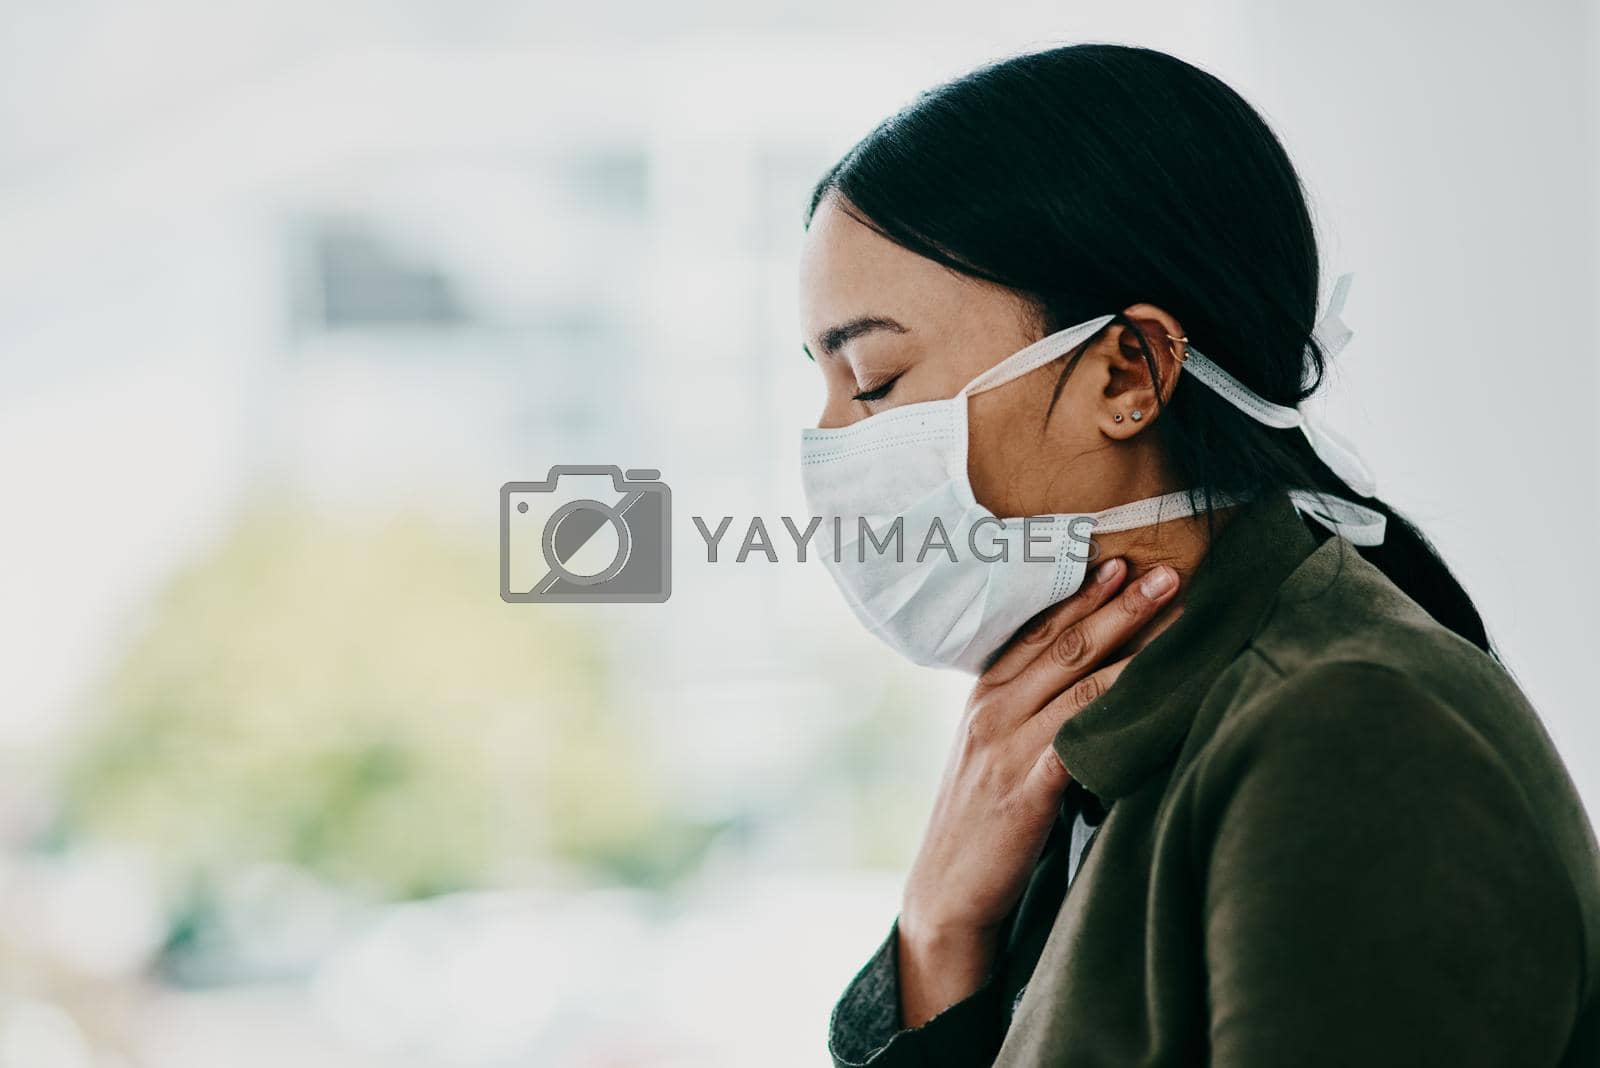 Royalty free image of Take care, Covid-19 is here. a young woman wearing a mask and suffering from throat pain in a doctors office. by YuriArcurs